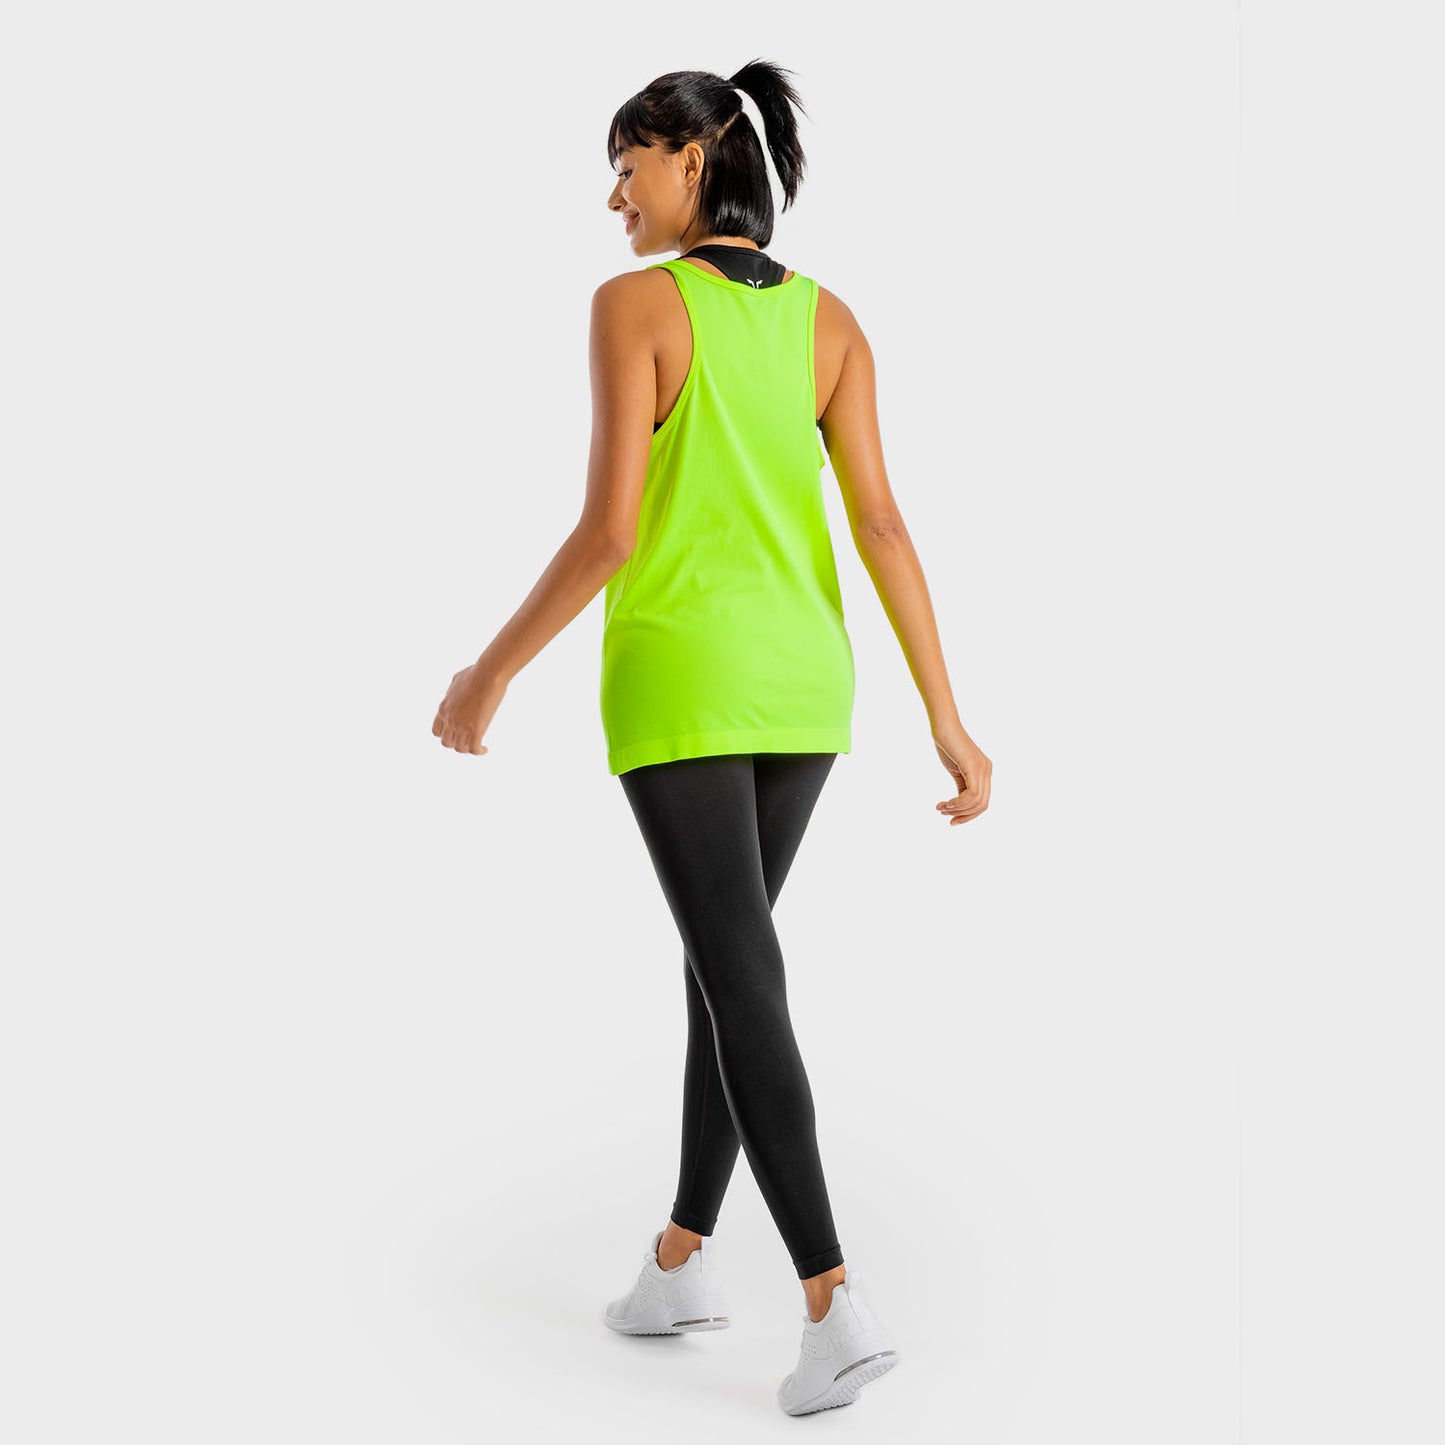 squatwolf-gym-tank-tops-for-women-primal-tank-neon-workout-clothes